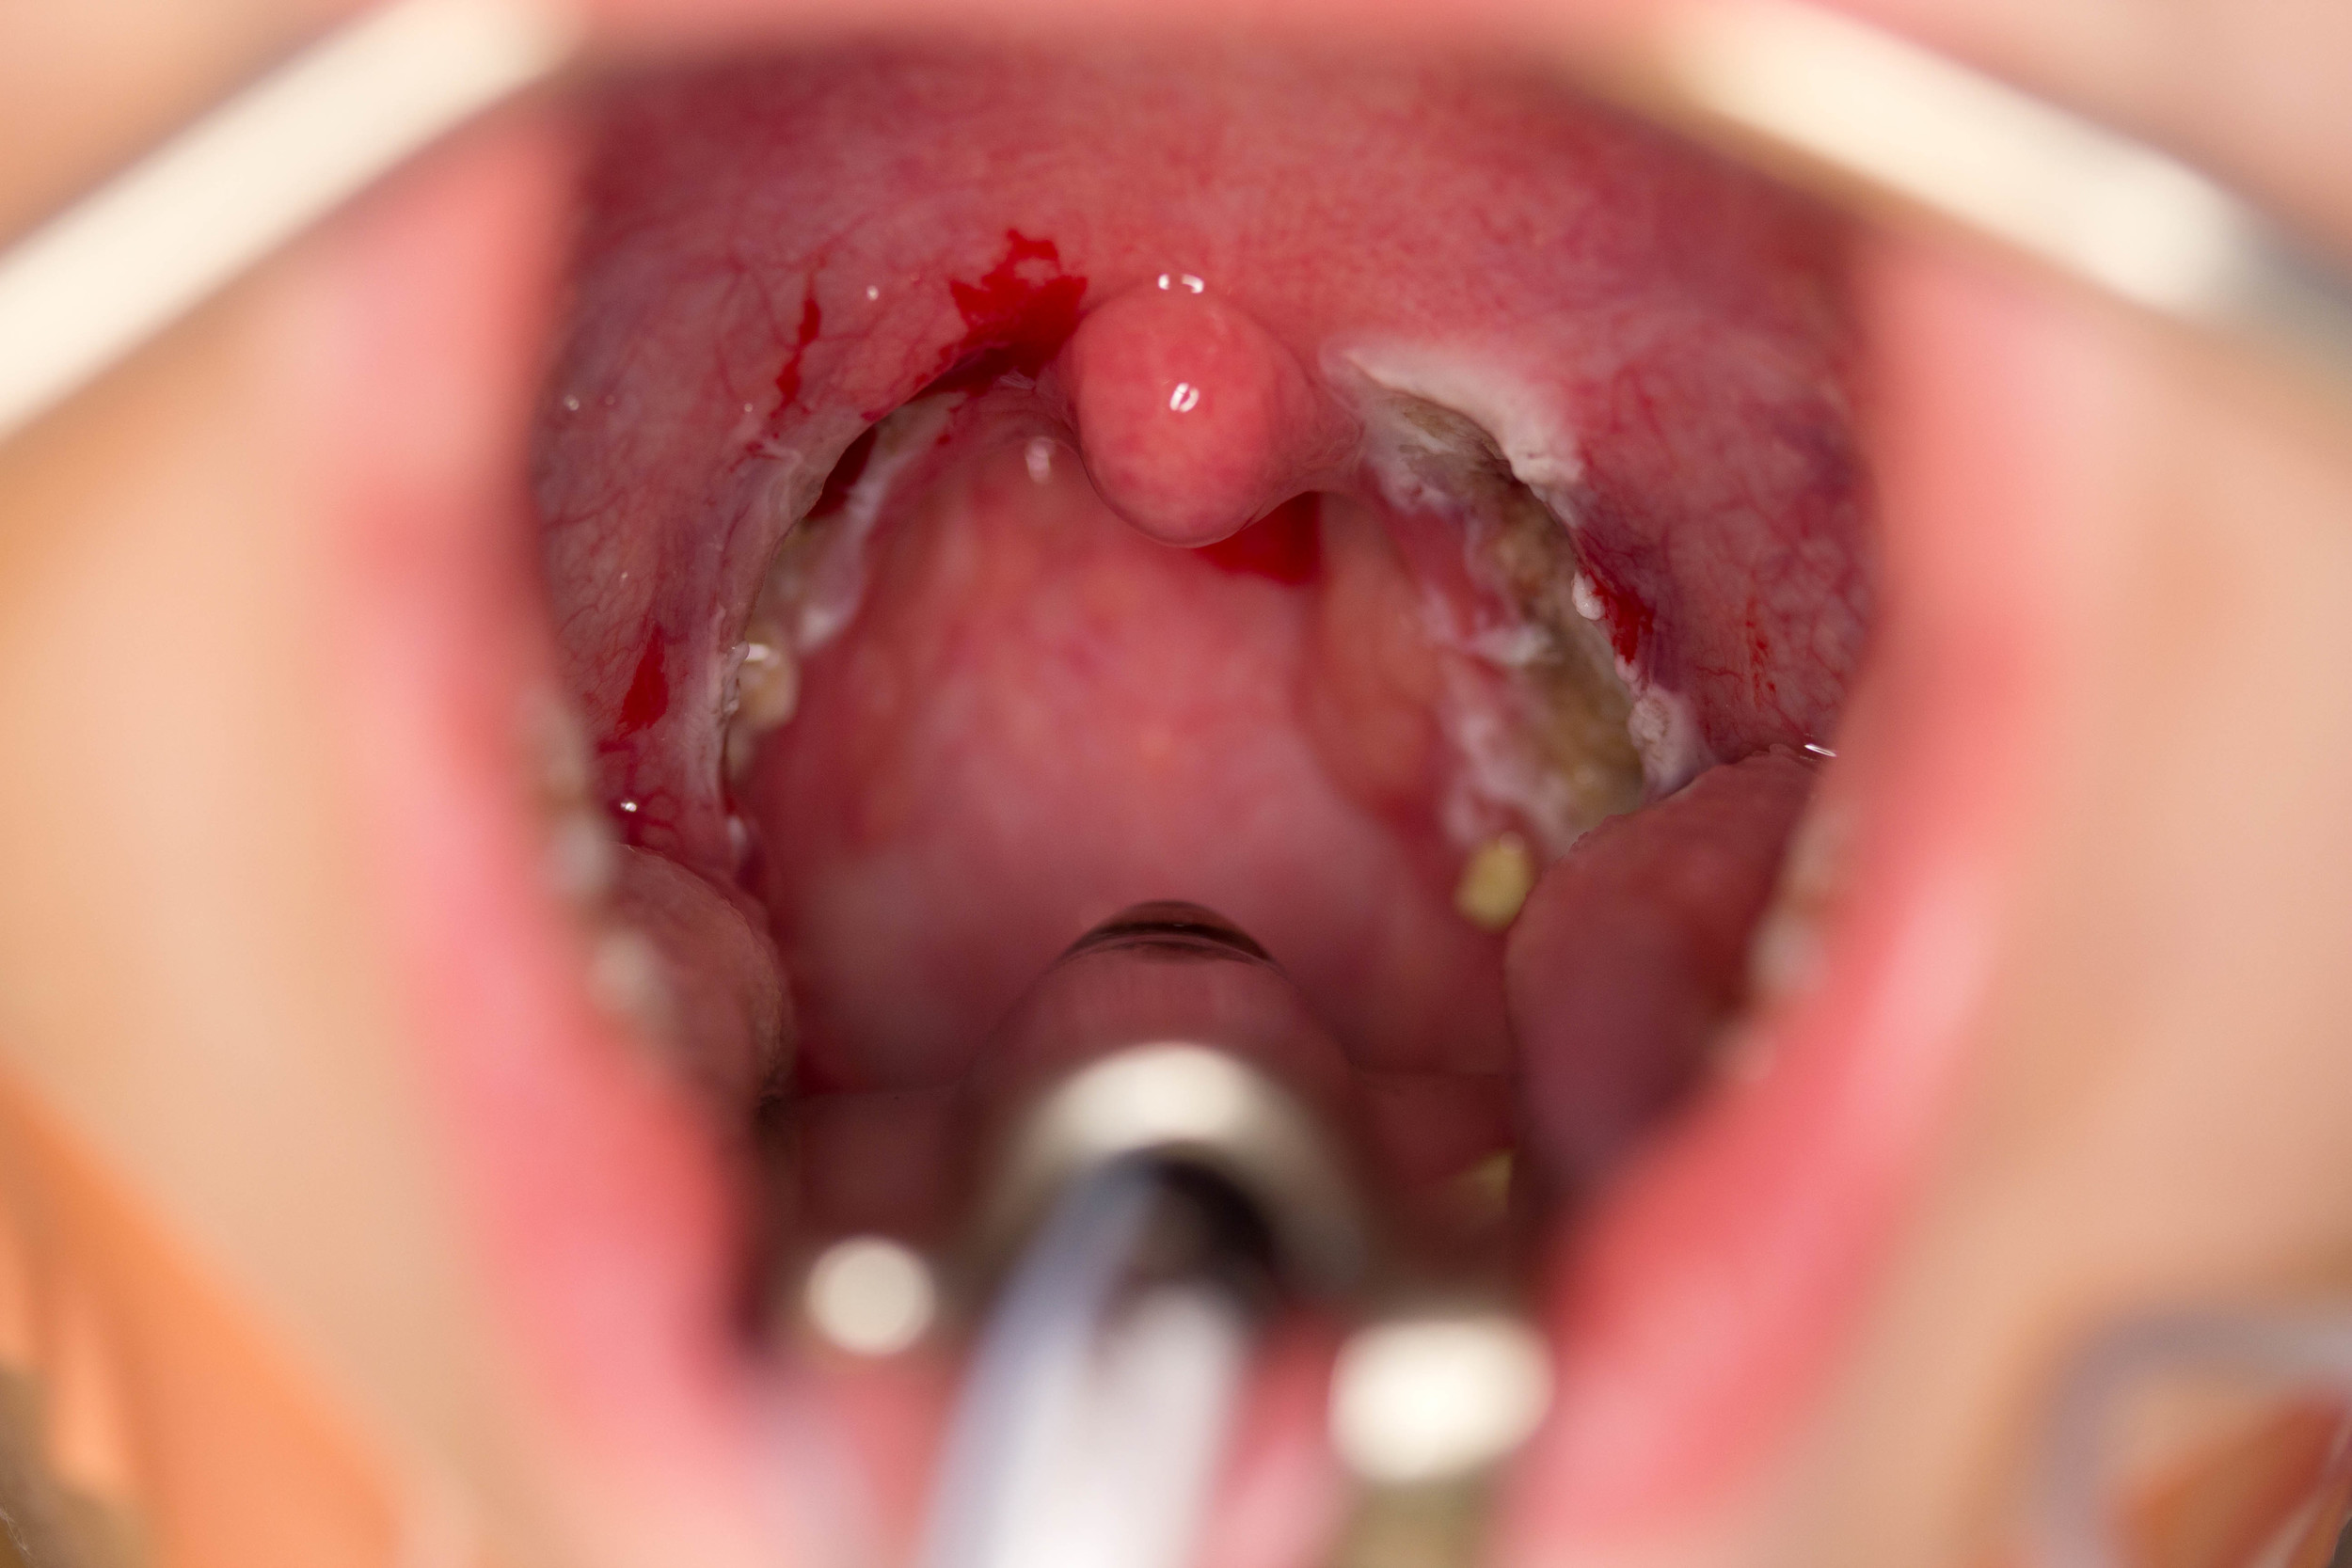 Tonsil removal surgery